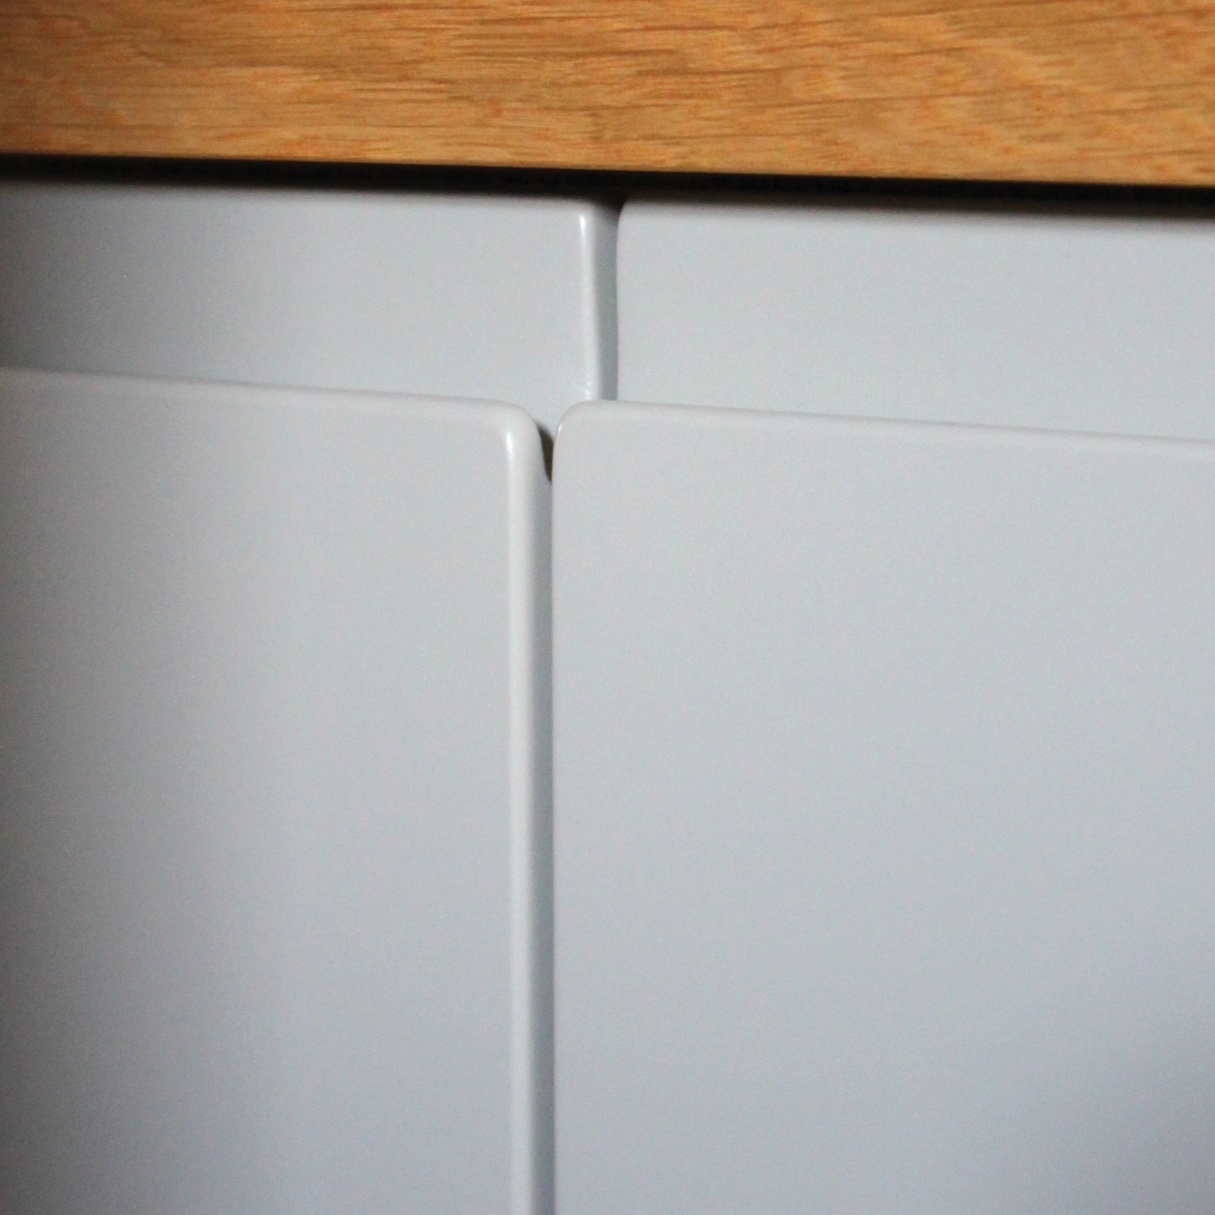 Tailor made sideboard in a hallway with a solid oak top and grey painted doors.